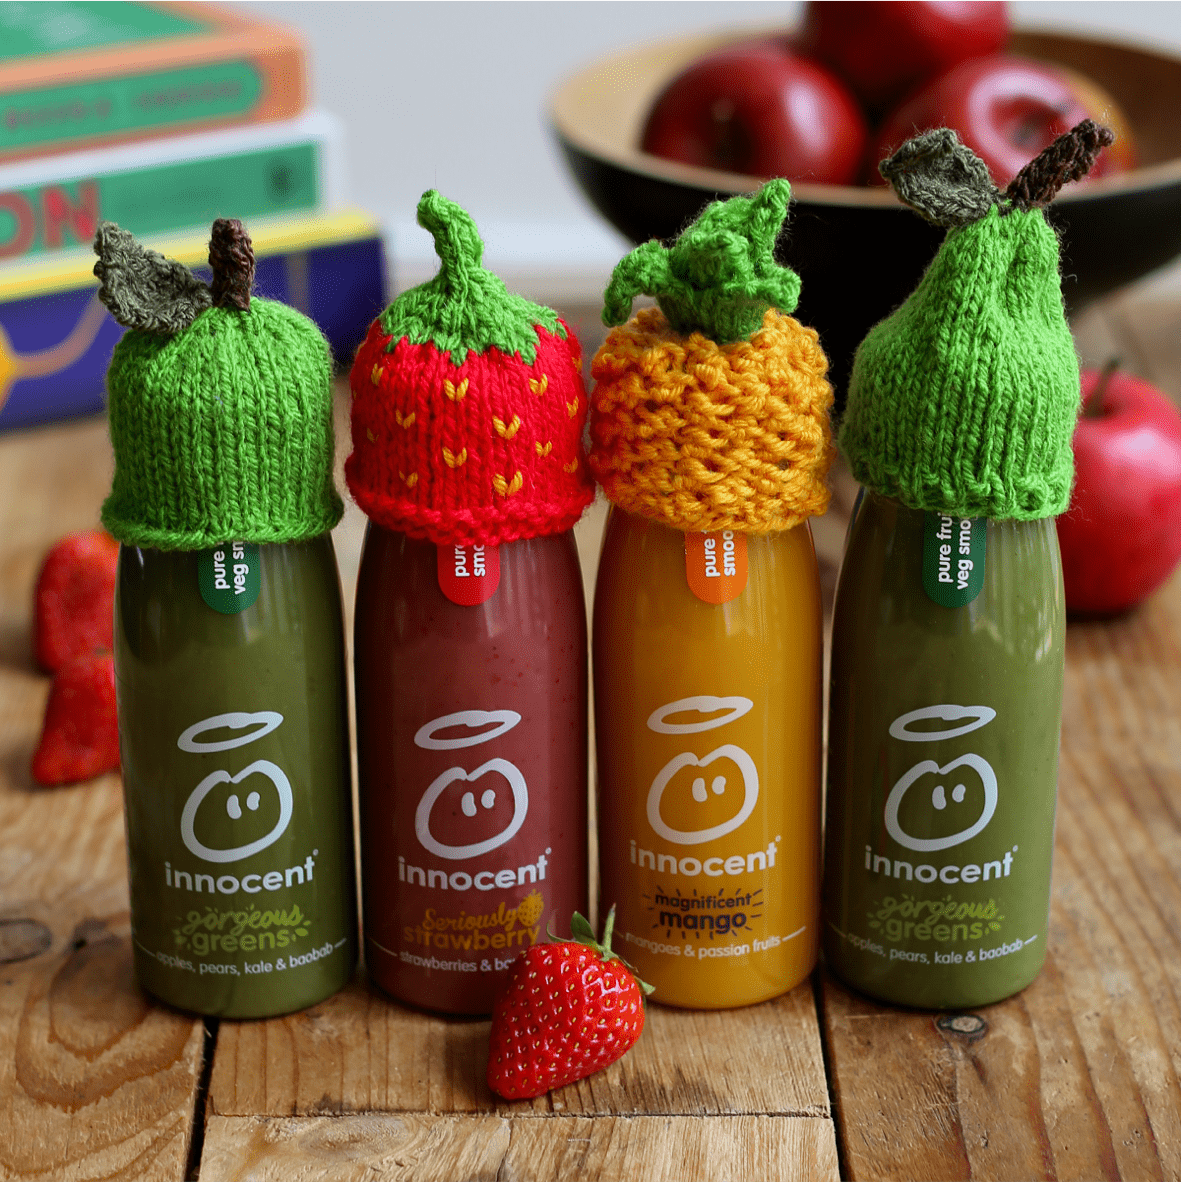 The Innocent digital marketing strategy, a series of smoothie bottles with knitted hats